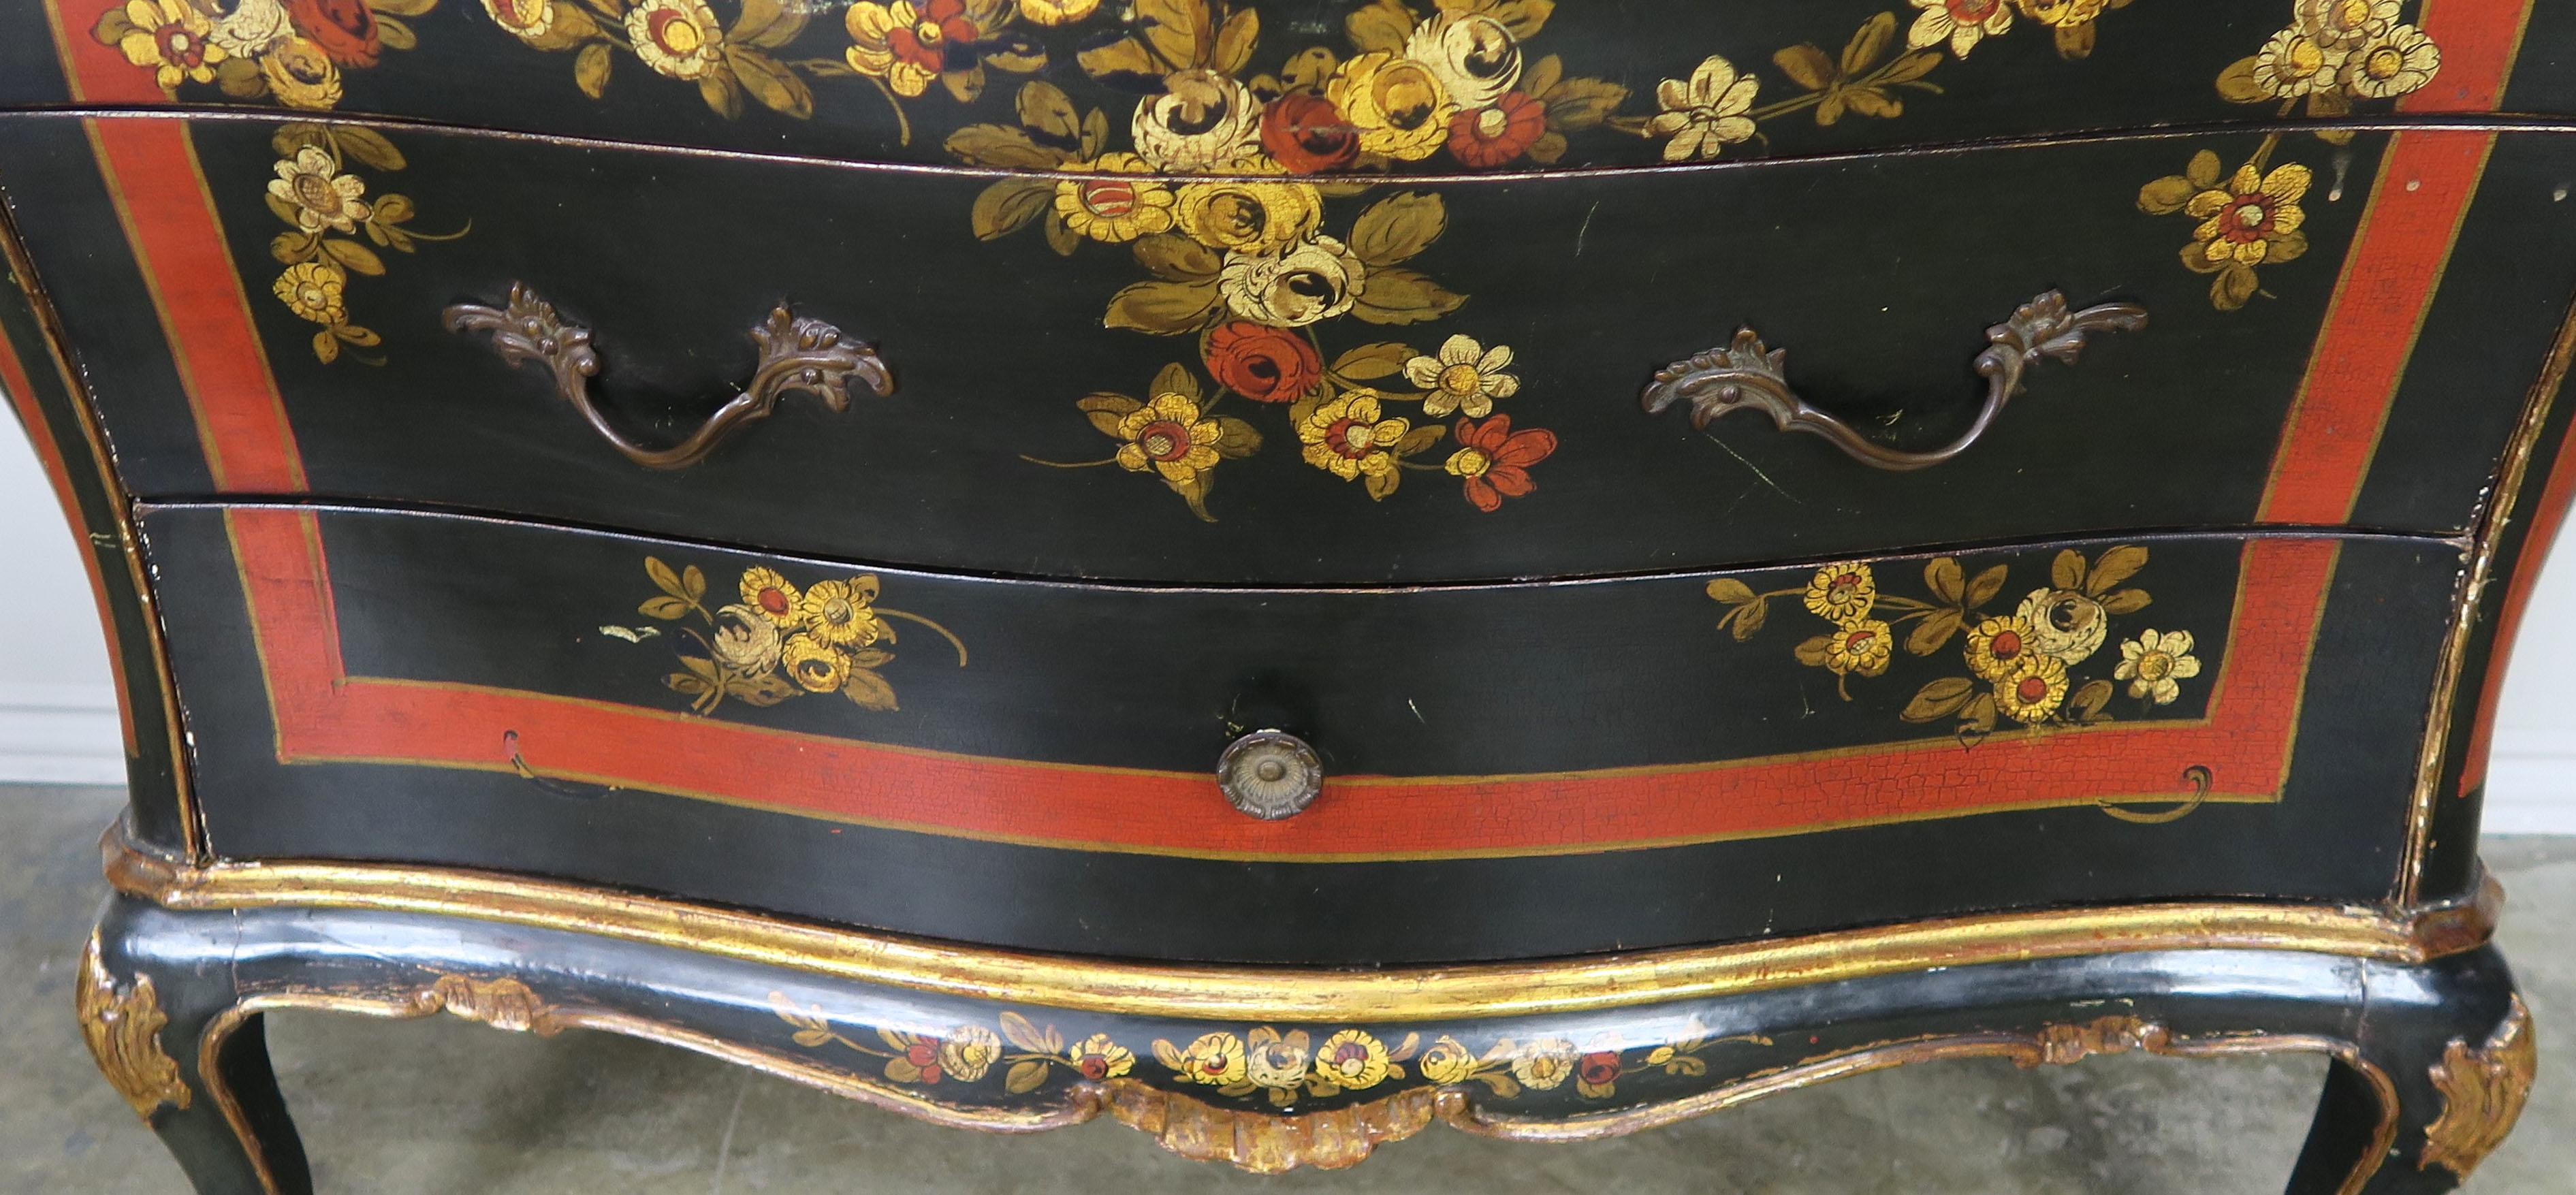 Mid-20th Century French Serpentine Shaped Chinoiserie Painted Chest of Drawers, circa 1930s